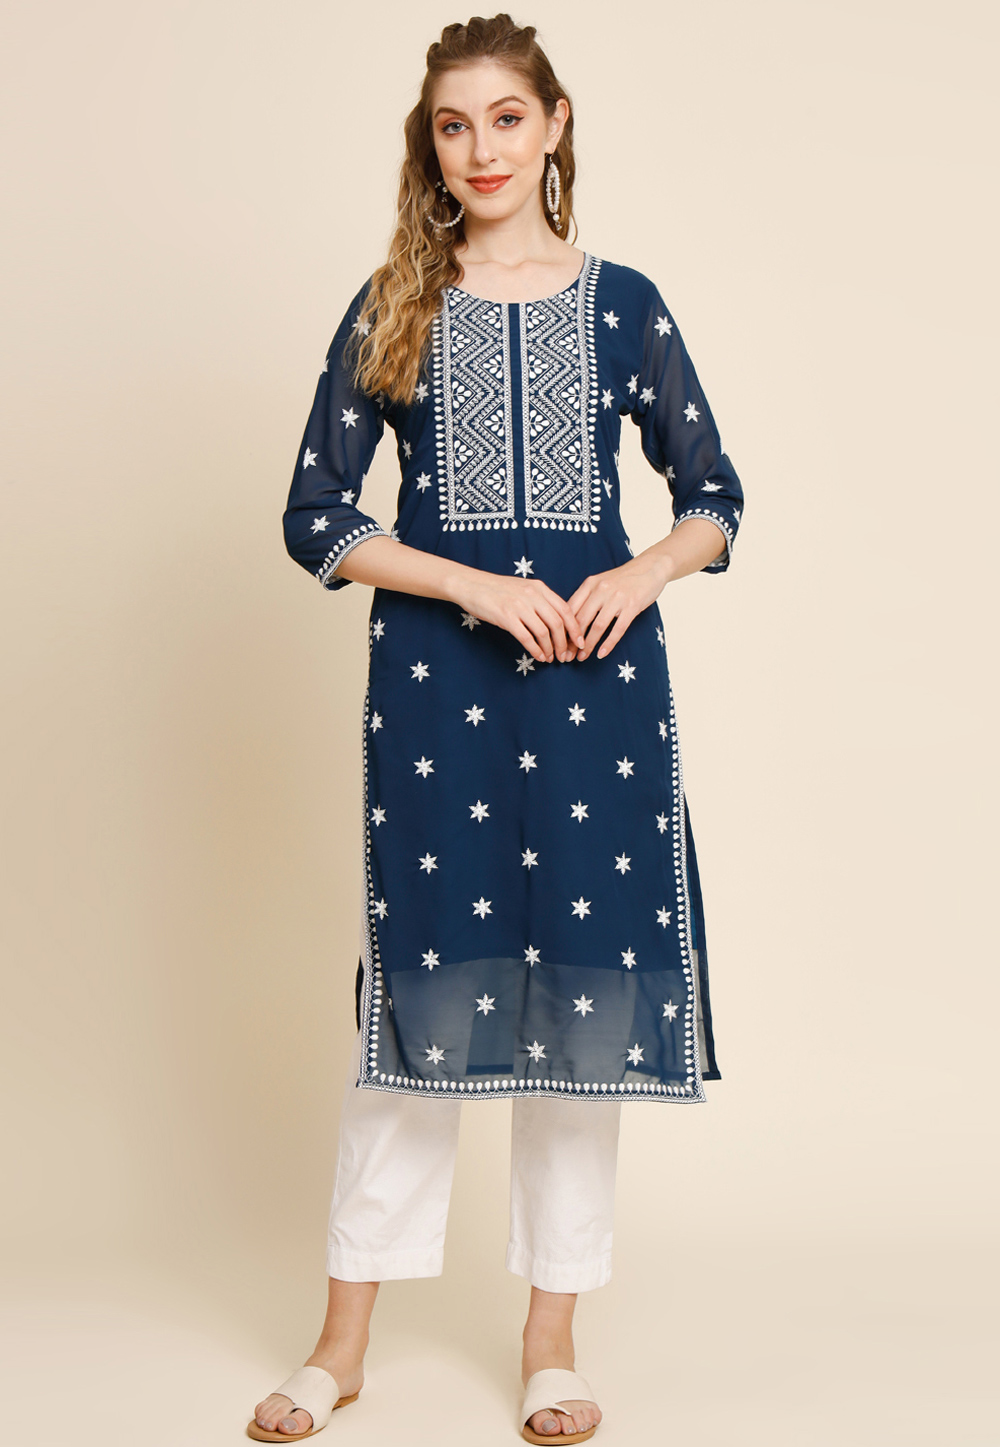 Navy Blue Georgette Kurtis Online Shopping for Women at Low Prices